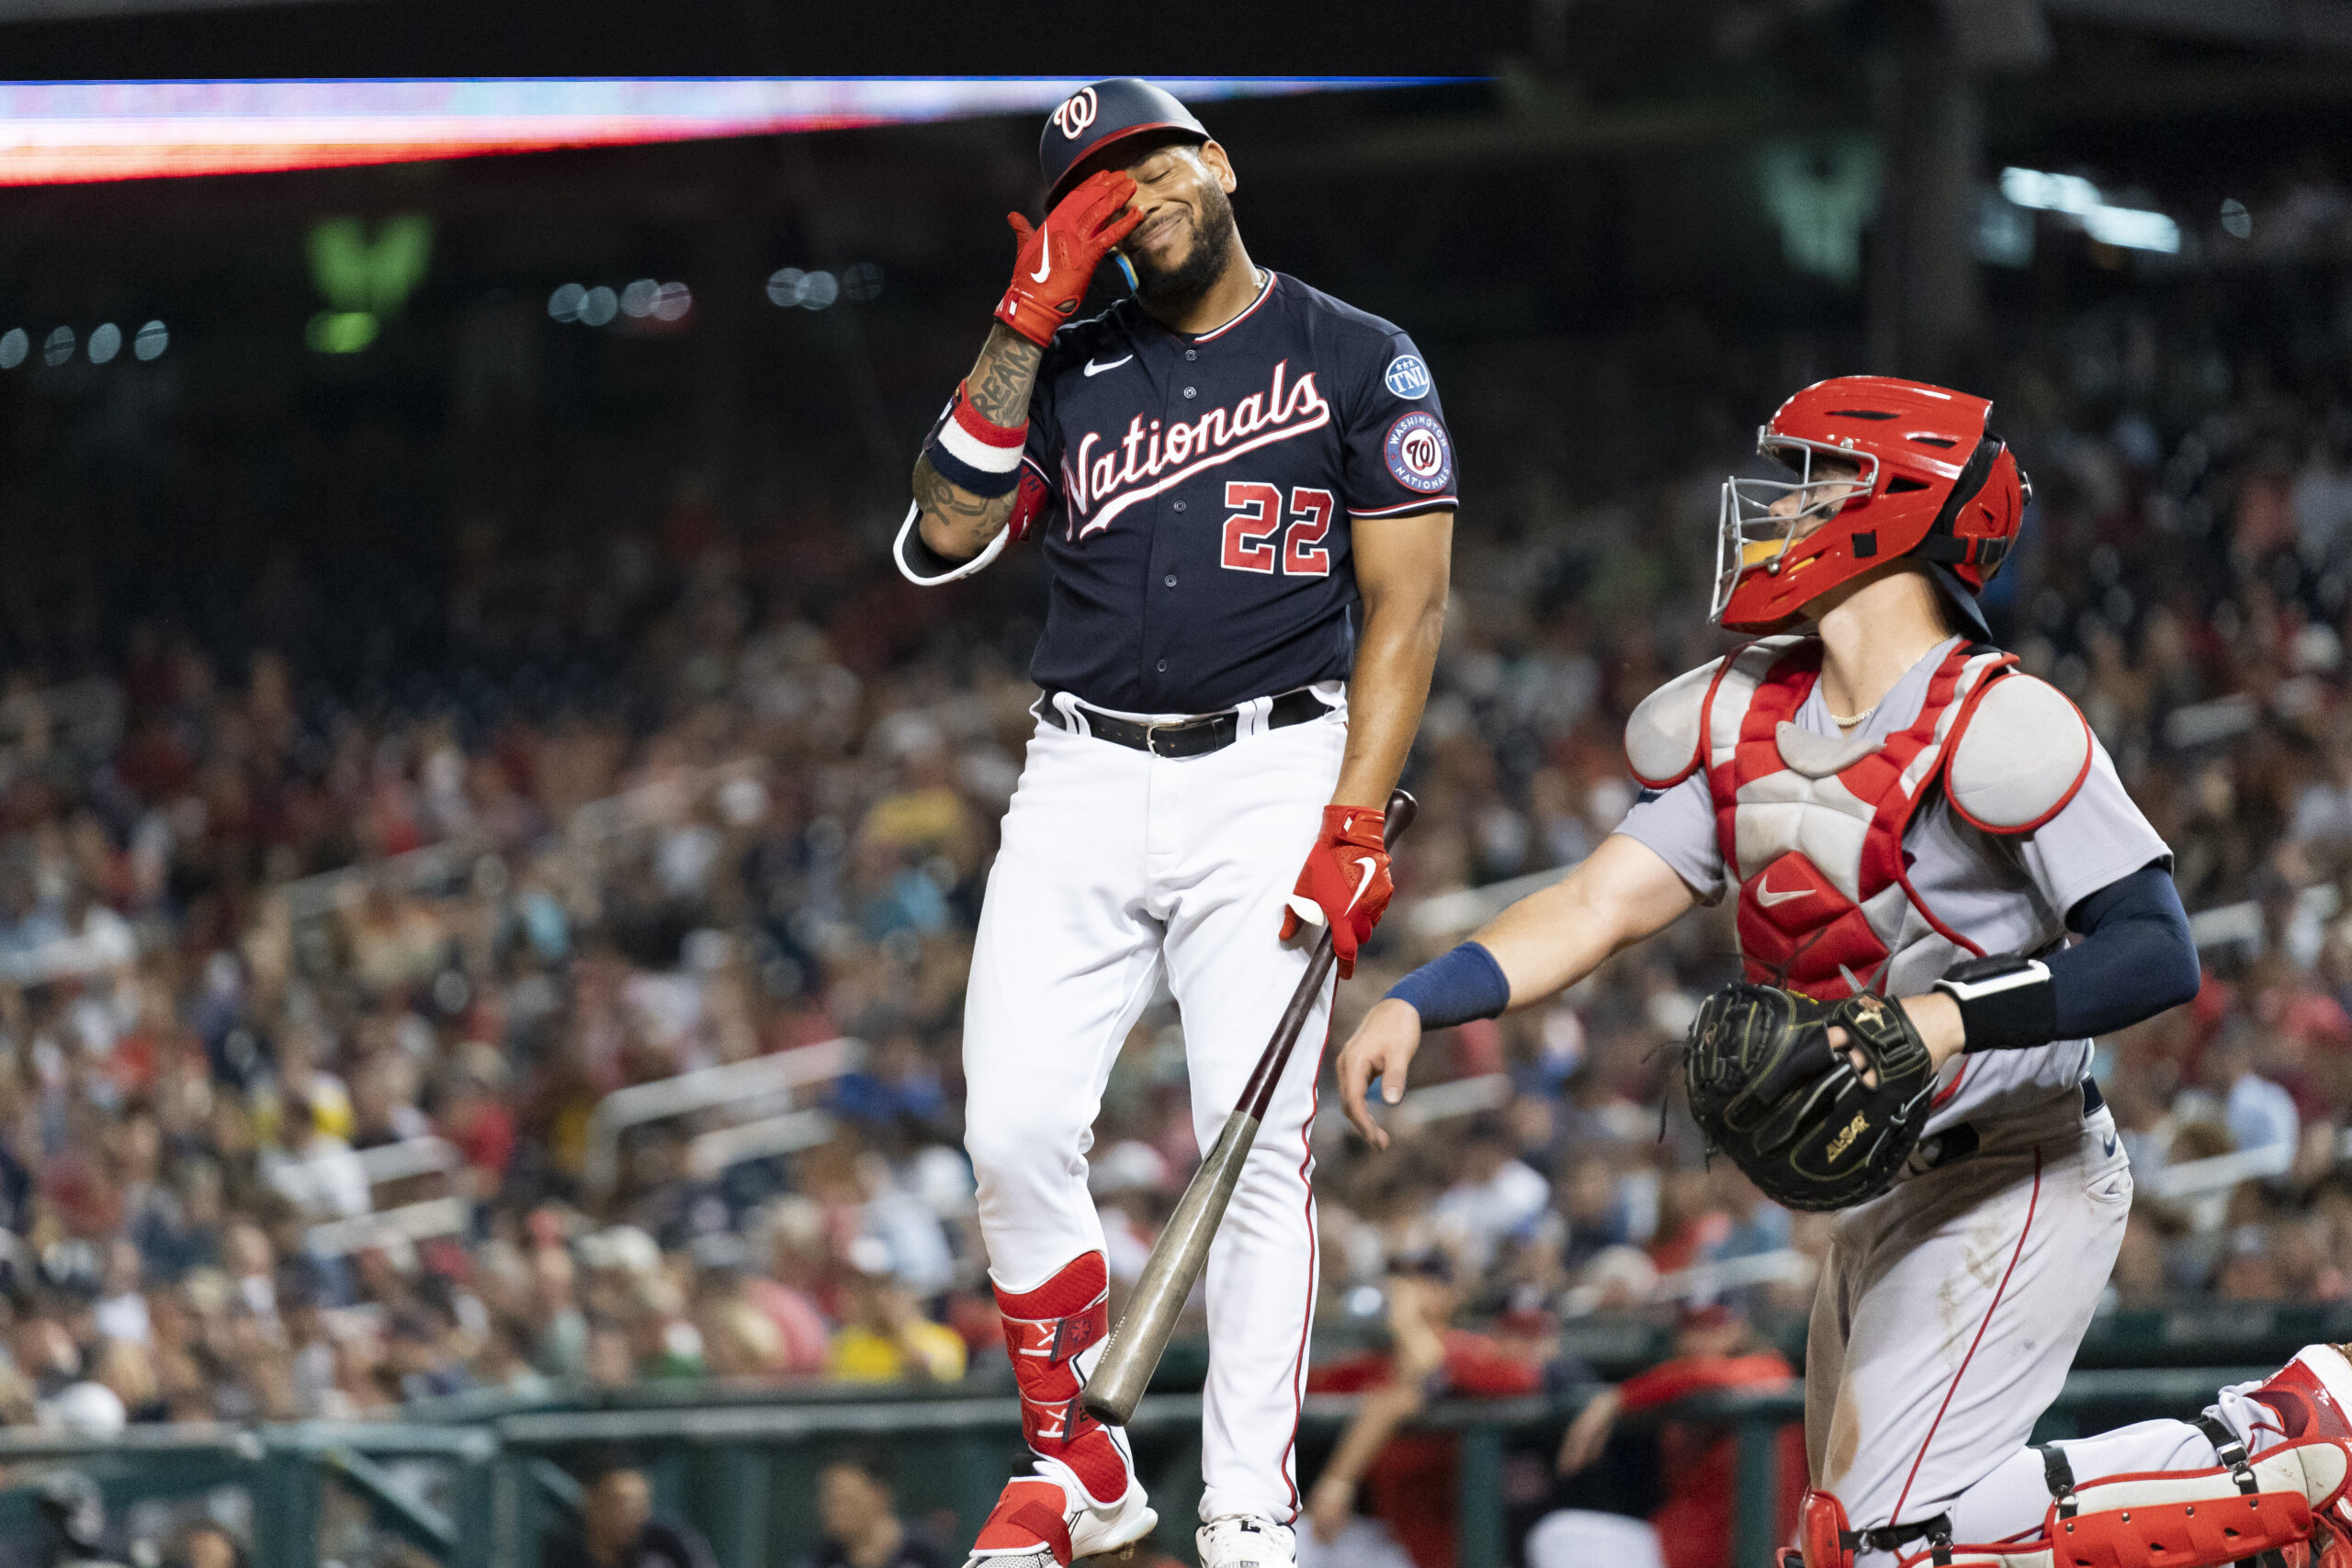 Story leads Red Sox against the Nationals